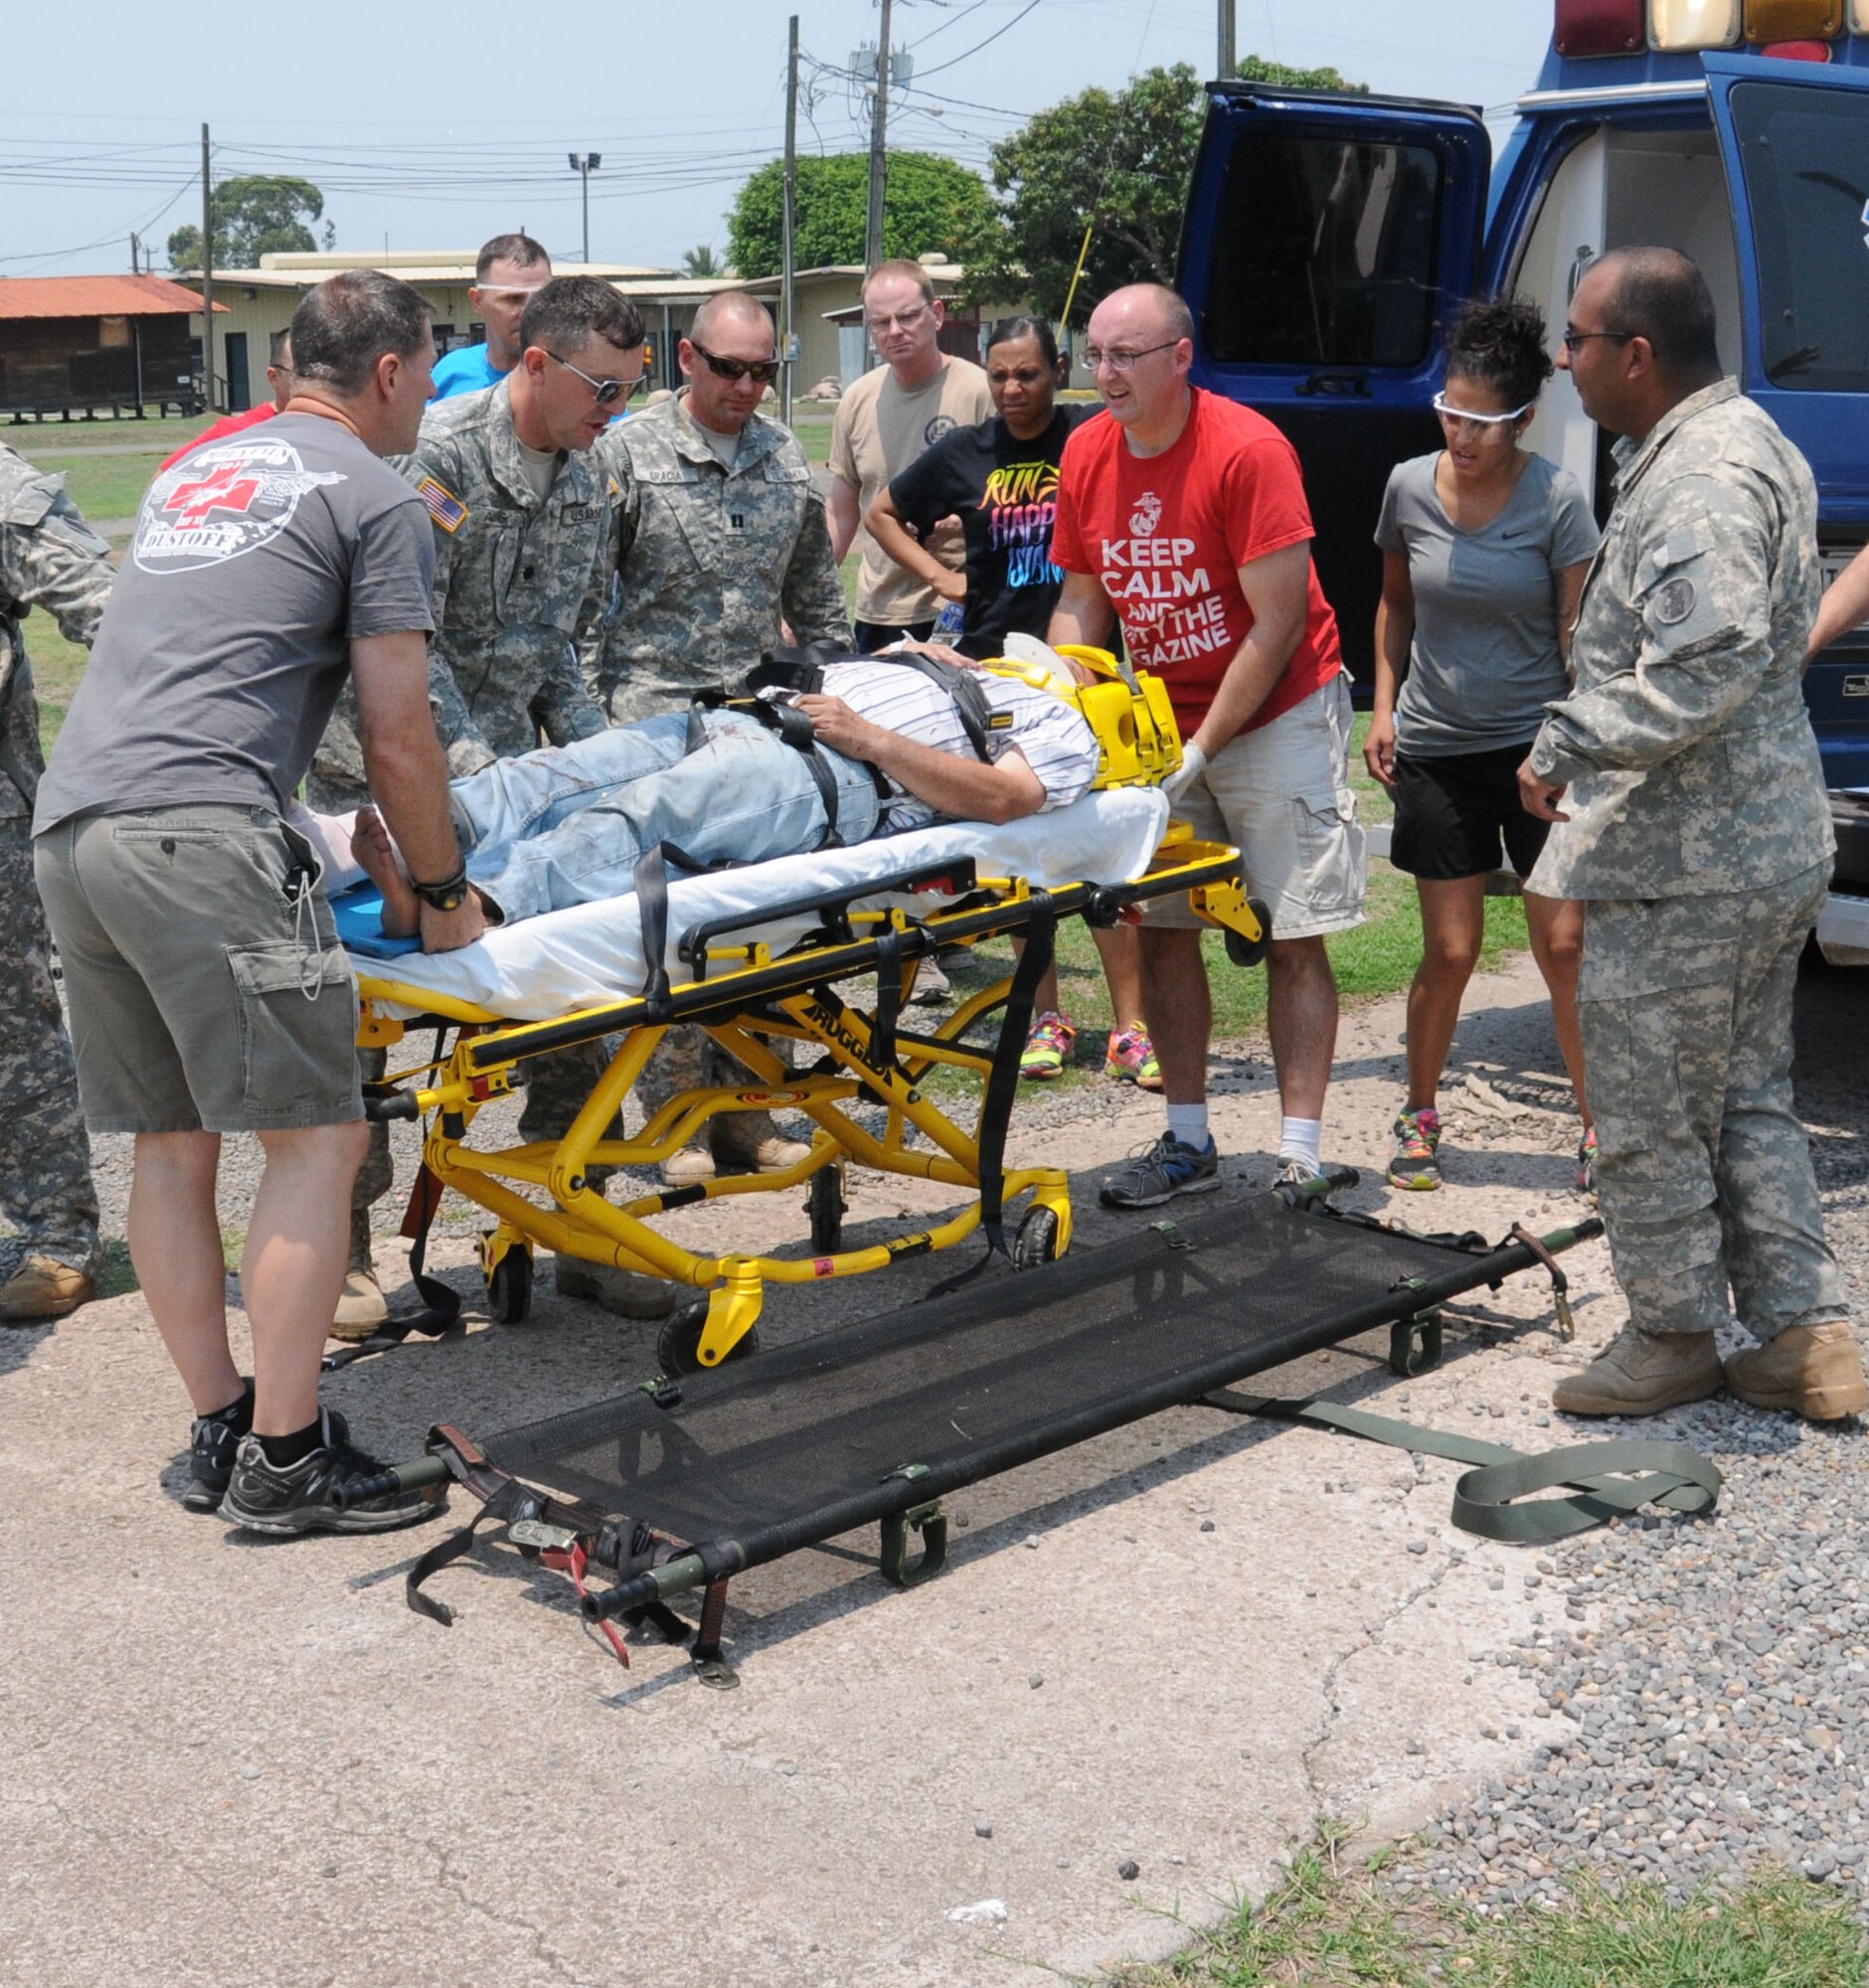 Personnel from Joint Task Force-Bravo’s Medical Element (MEDEL) remove an automobile accident patient from an ambulance to prepare him for an air medical evacuation (MEDEVAC) to Hospital Militar in Tegucigalpa, Honduras, May 13, 2014.  Joint Task Force-Bravo’s Medical Element (MEDEL) and 1-228th Aviation Regiment responded to a Honduran government request for a ground and air medical evacuation (MEDEVAC).  A vehicle traveling west on Honduras Highway CA-5 about 13 miles outside of Comayagua was struck from behind by a tractor trailer truck.  The 18-wheeler subsequently pushed the vehicle into the trailer of another tractor trailer crushing the vehicle.  (Photo by U. S. Air National Guard Capt. Steven Stubbs)
